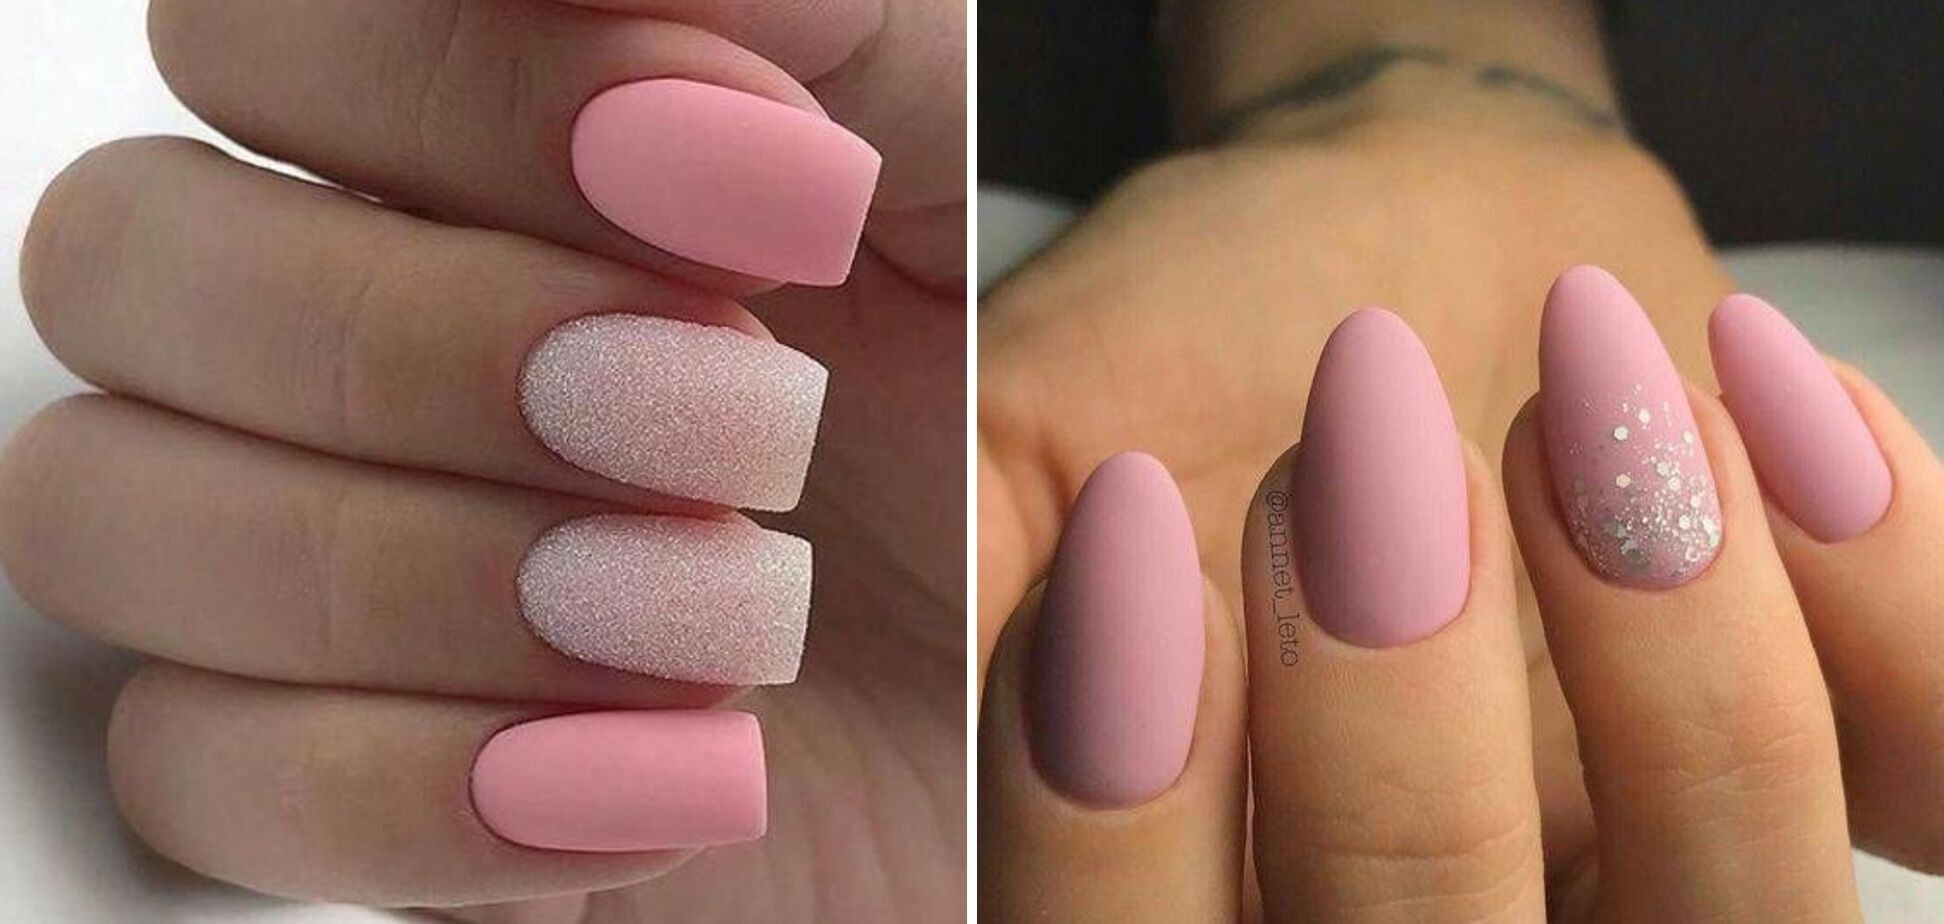 ''Baby pink nails'' trend goes viral on TikTok: what January manicure looks like